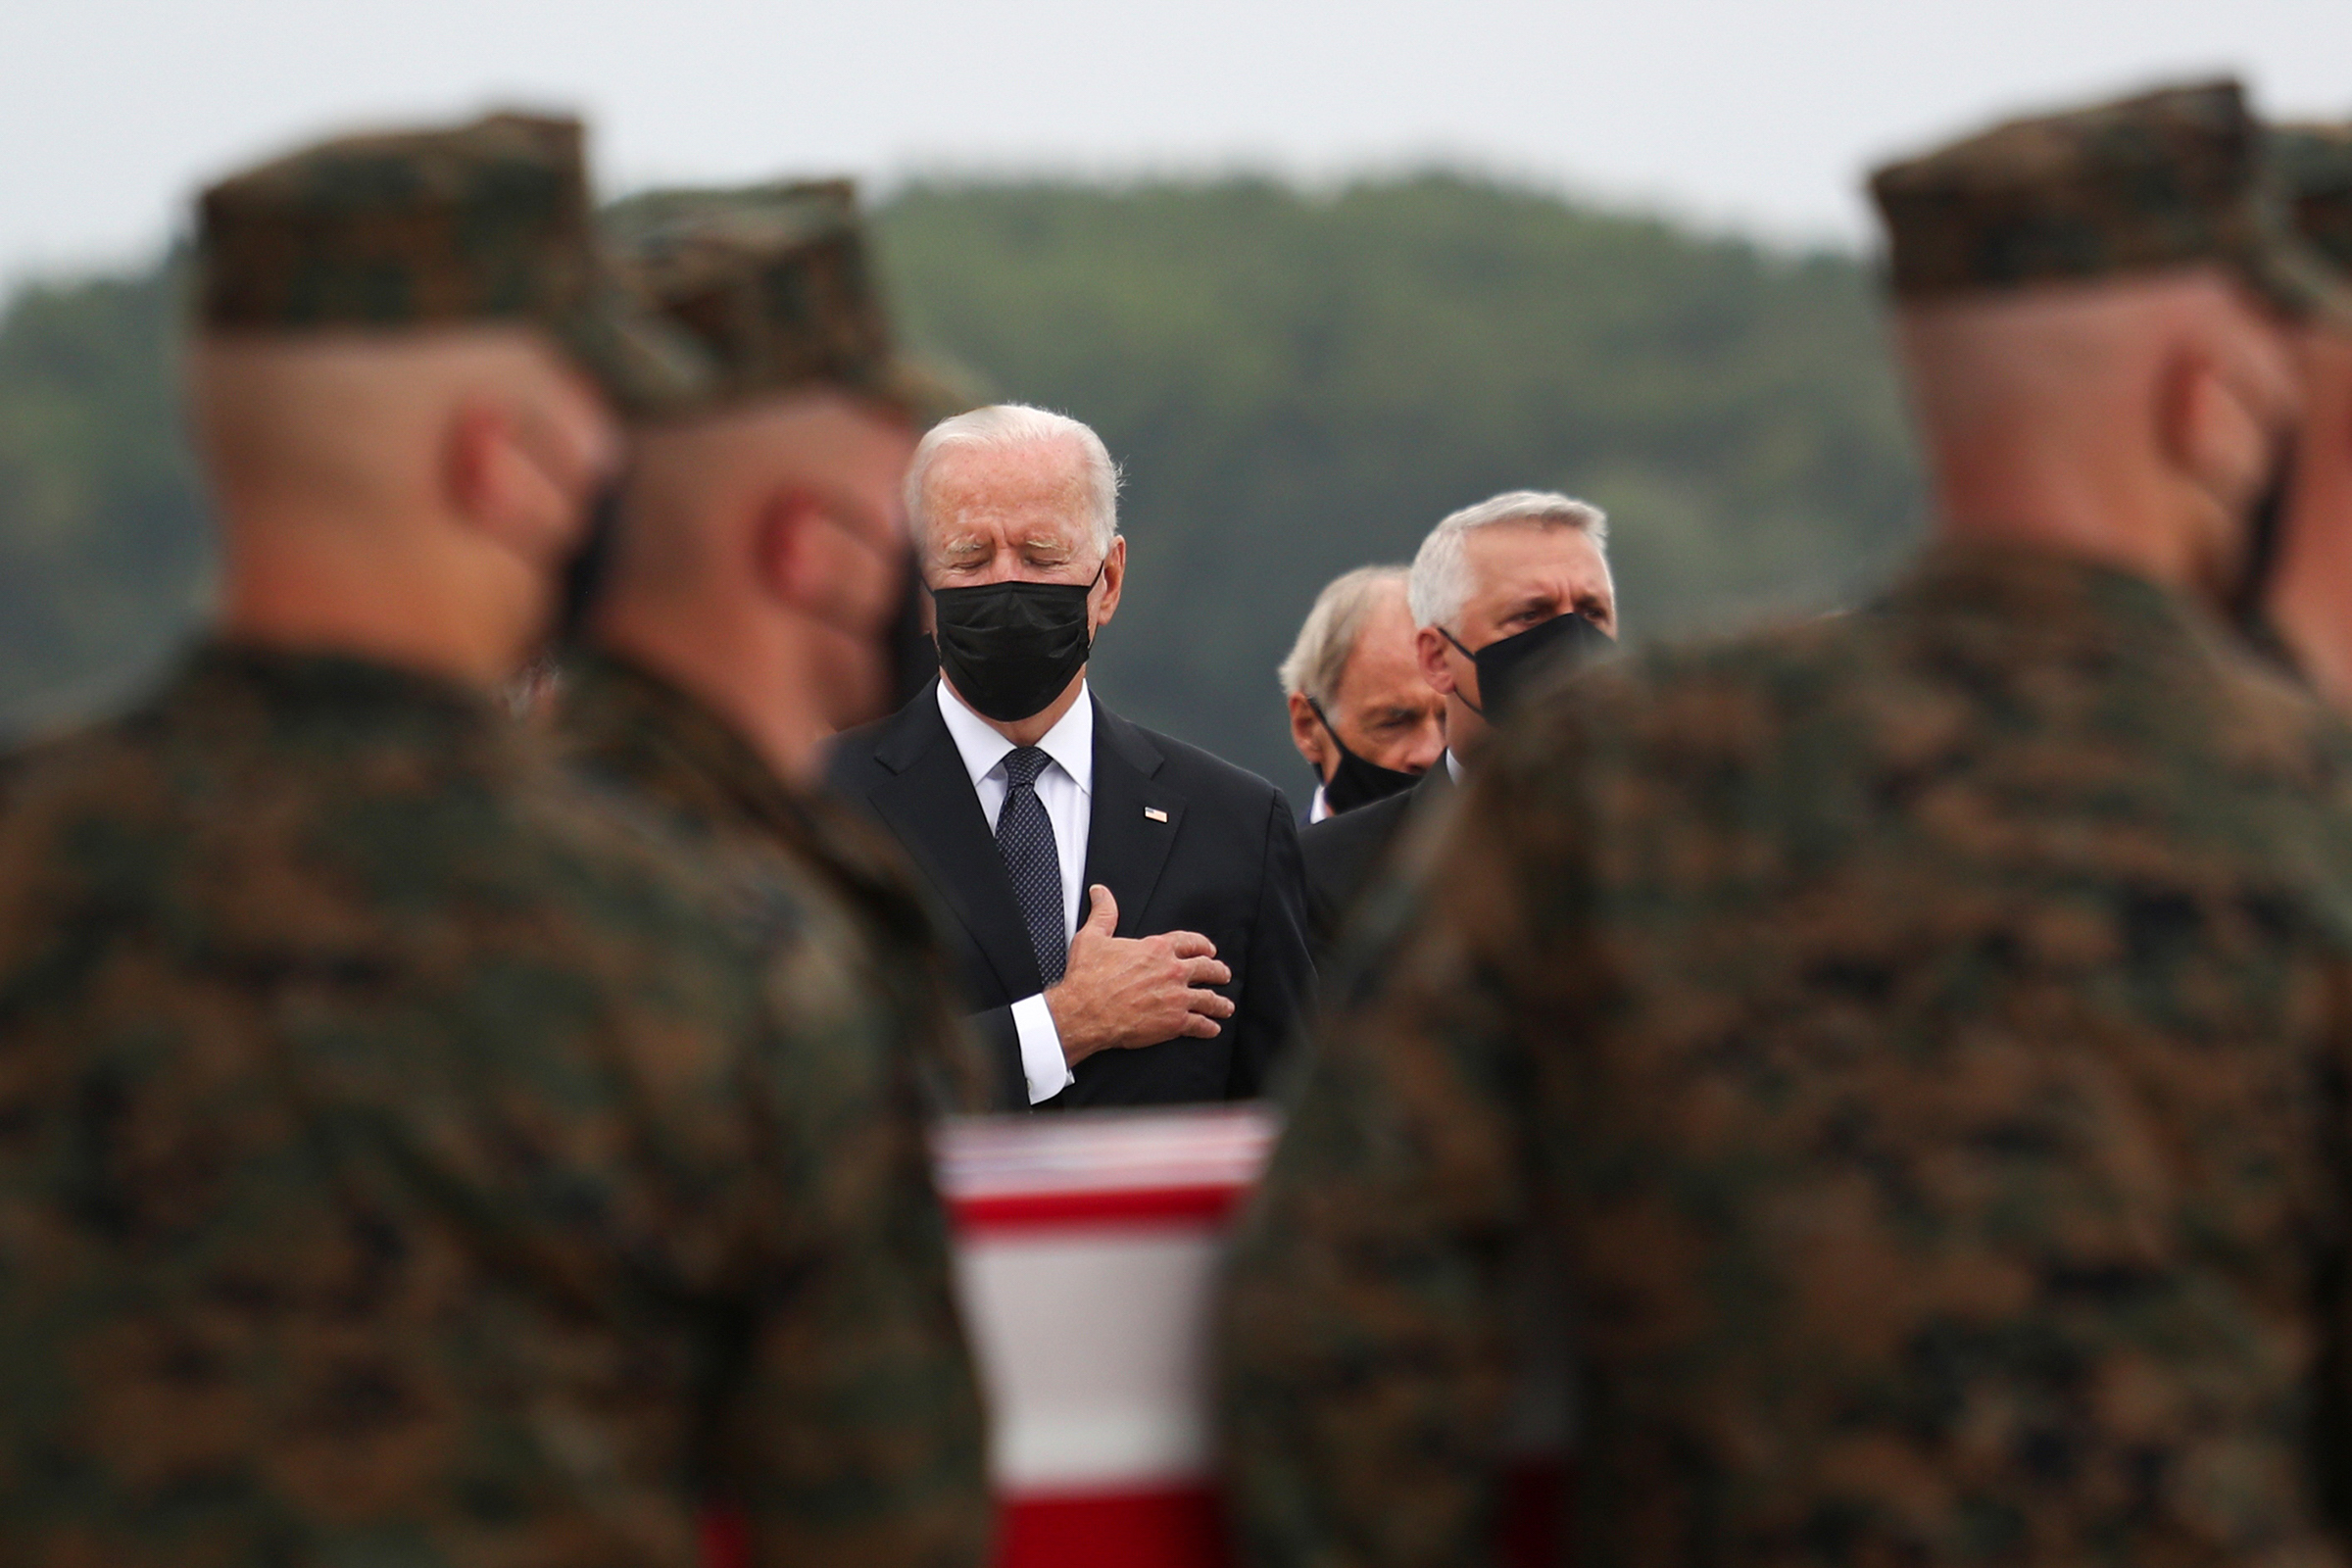 President Joe Biden closes his eyes during the dignified transfer of the remains of American service members, who were killed in a suicide bombing days earlier in Kabul, at Dover Air Force Base in Delaware on Aug. 29. (Tom Brenner—Reuters)